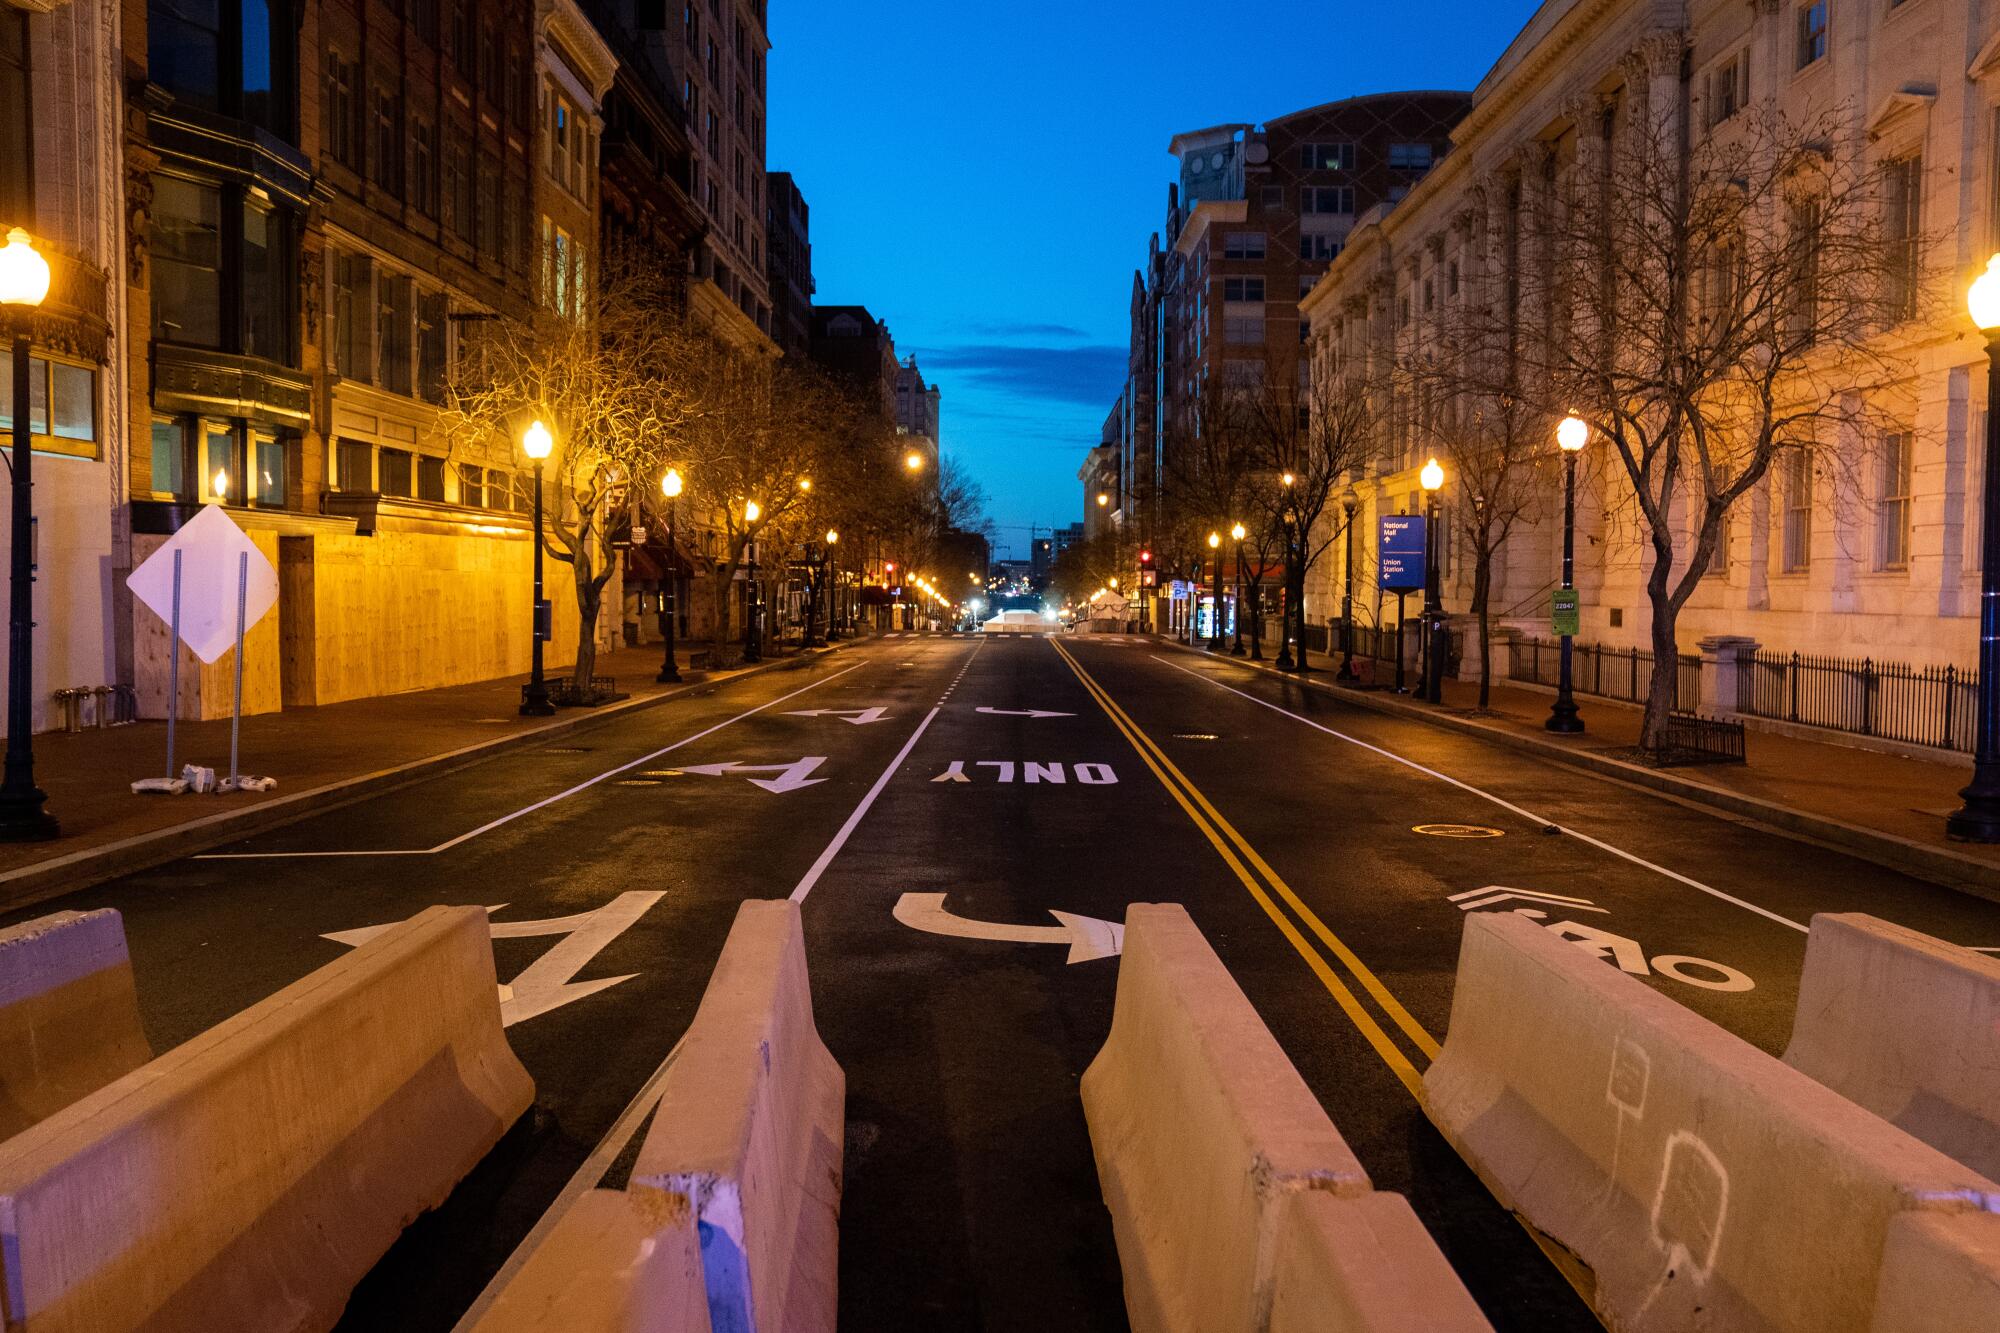  Barricades are placed on a street in downtown Washington DC.